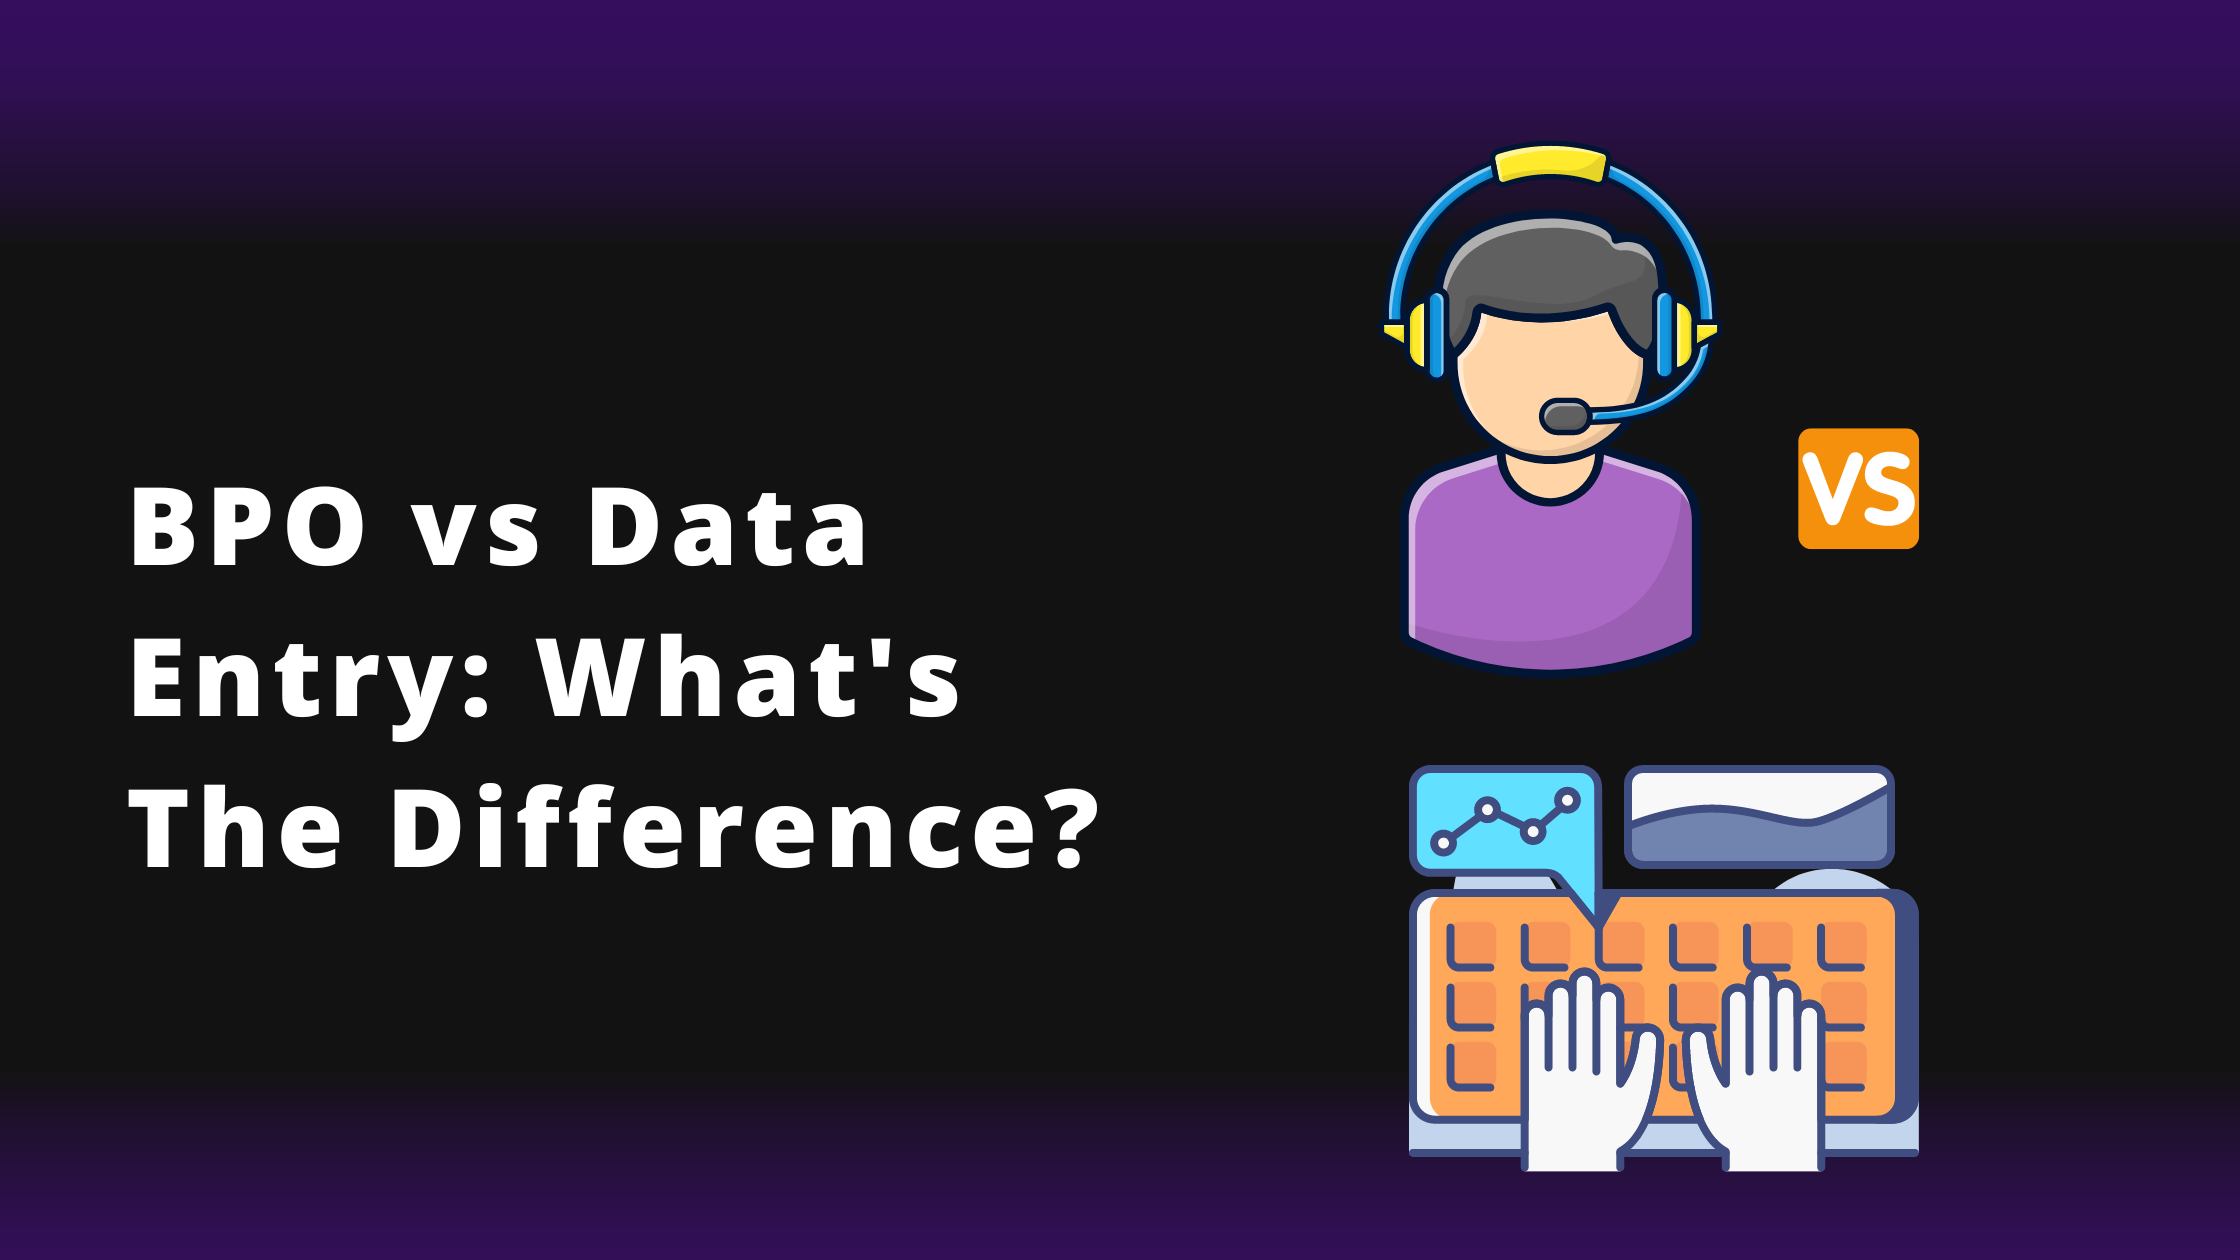 BPO vs Data Entry: What’s the difference?